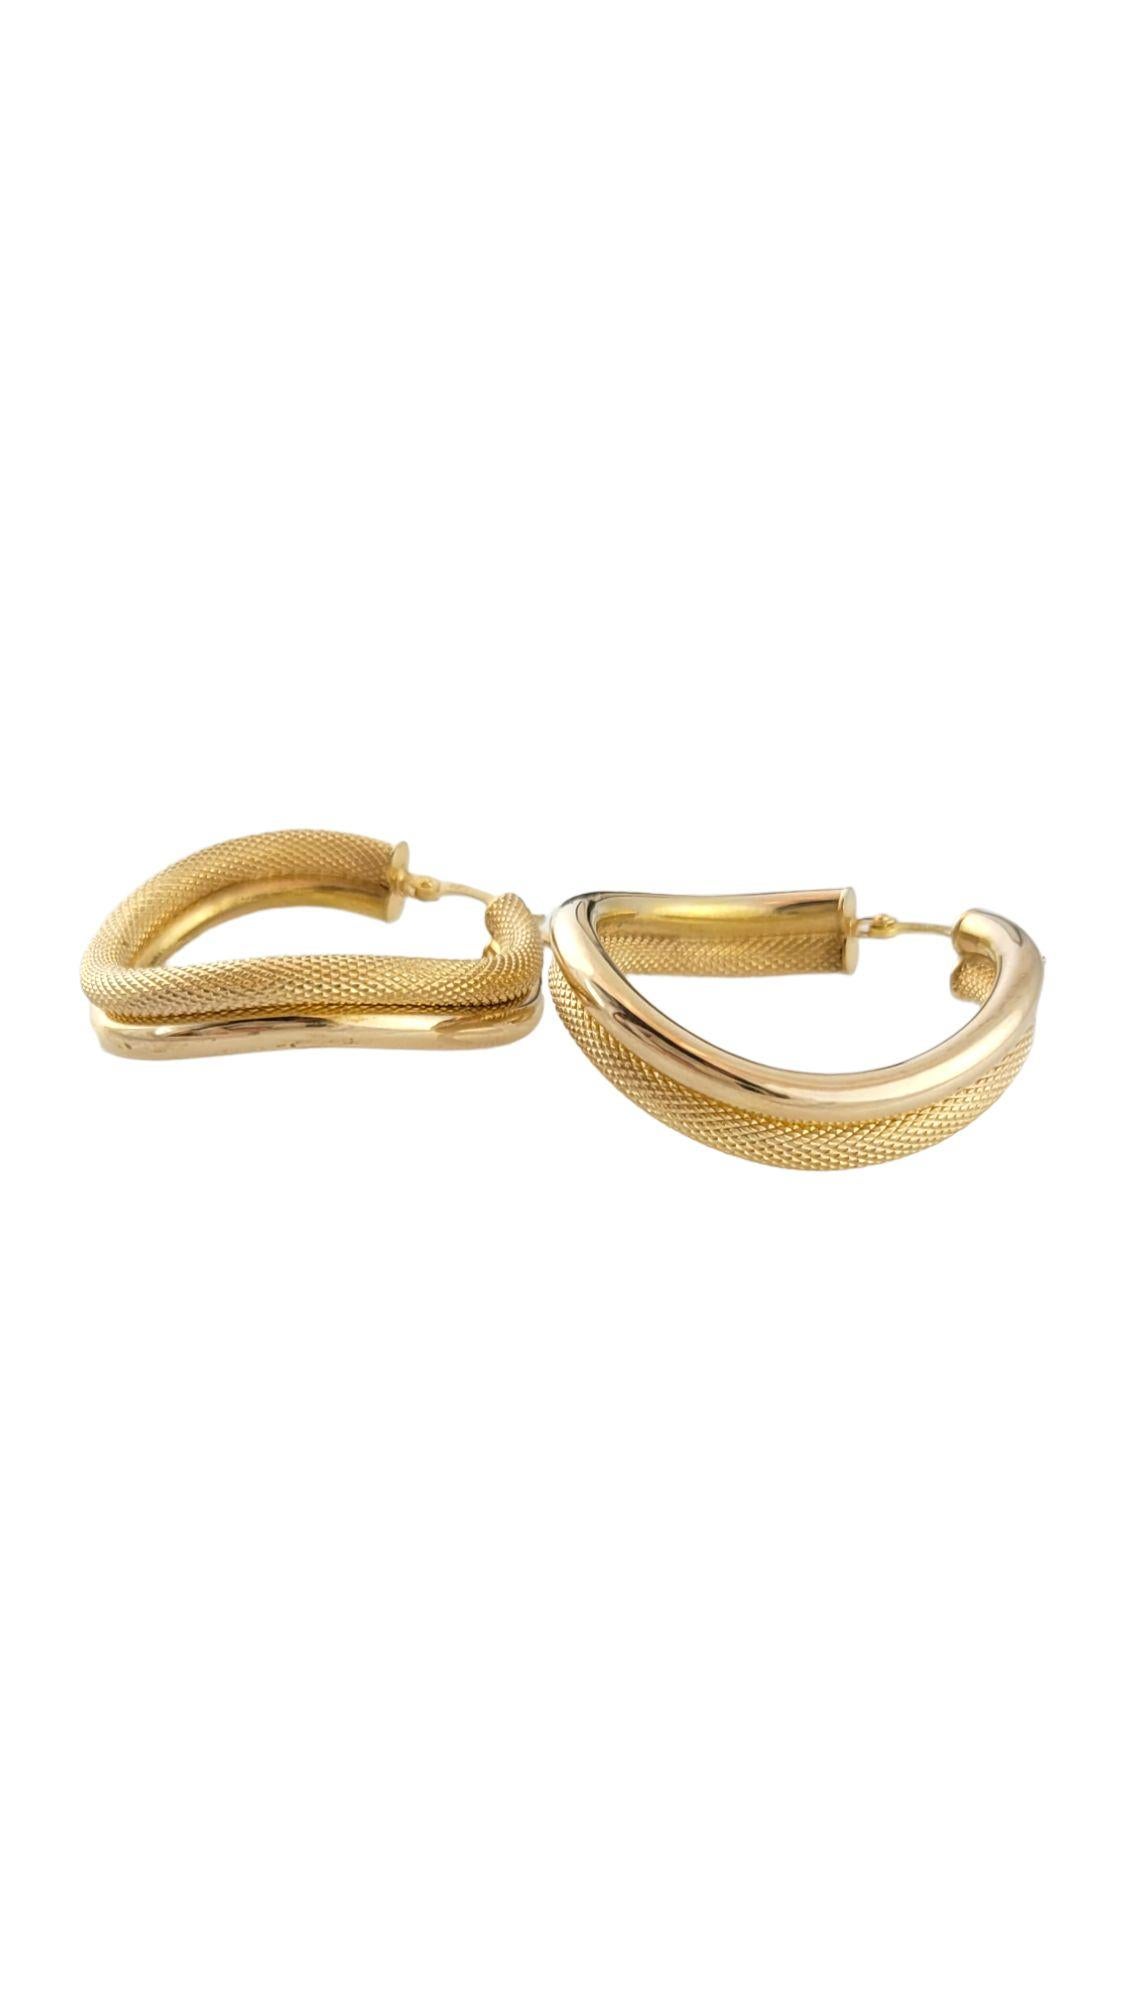 Gorgeous set of 14K gold Curved hoops with a smooth and a textured finish for a beautiful, contrasted finish!

Size: 32mm X 30.5mm X 6mm

Weight: 5.22 g/ 3.4 dwt

Hallmark: 14KT USA

Very good condition, professionally polished.

Will come packaged